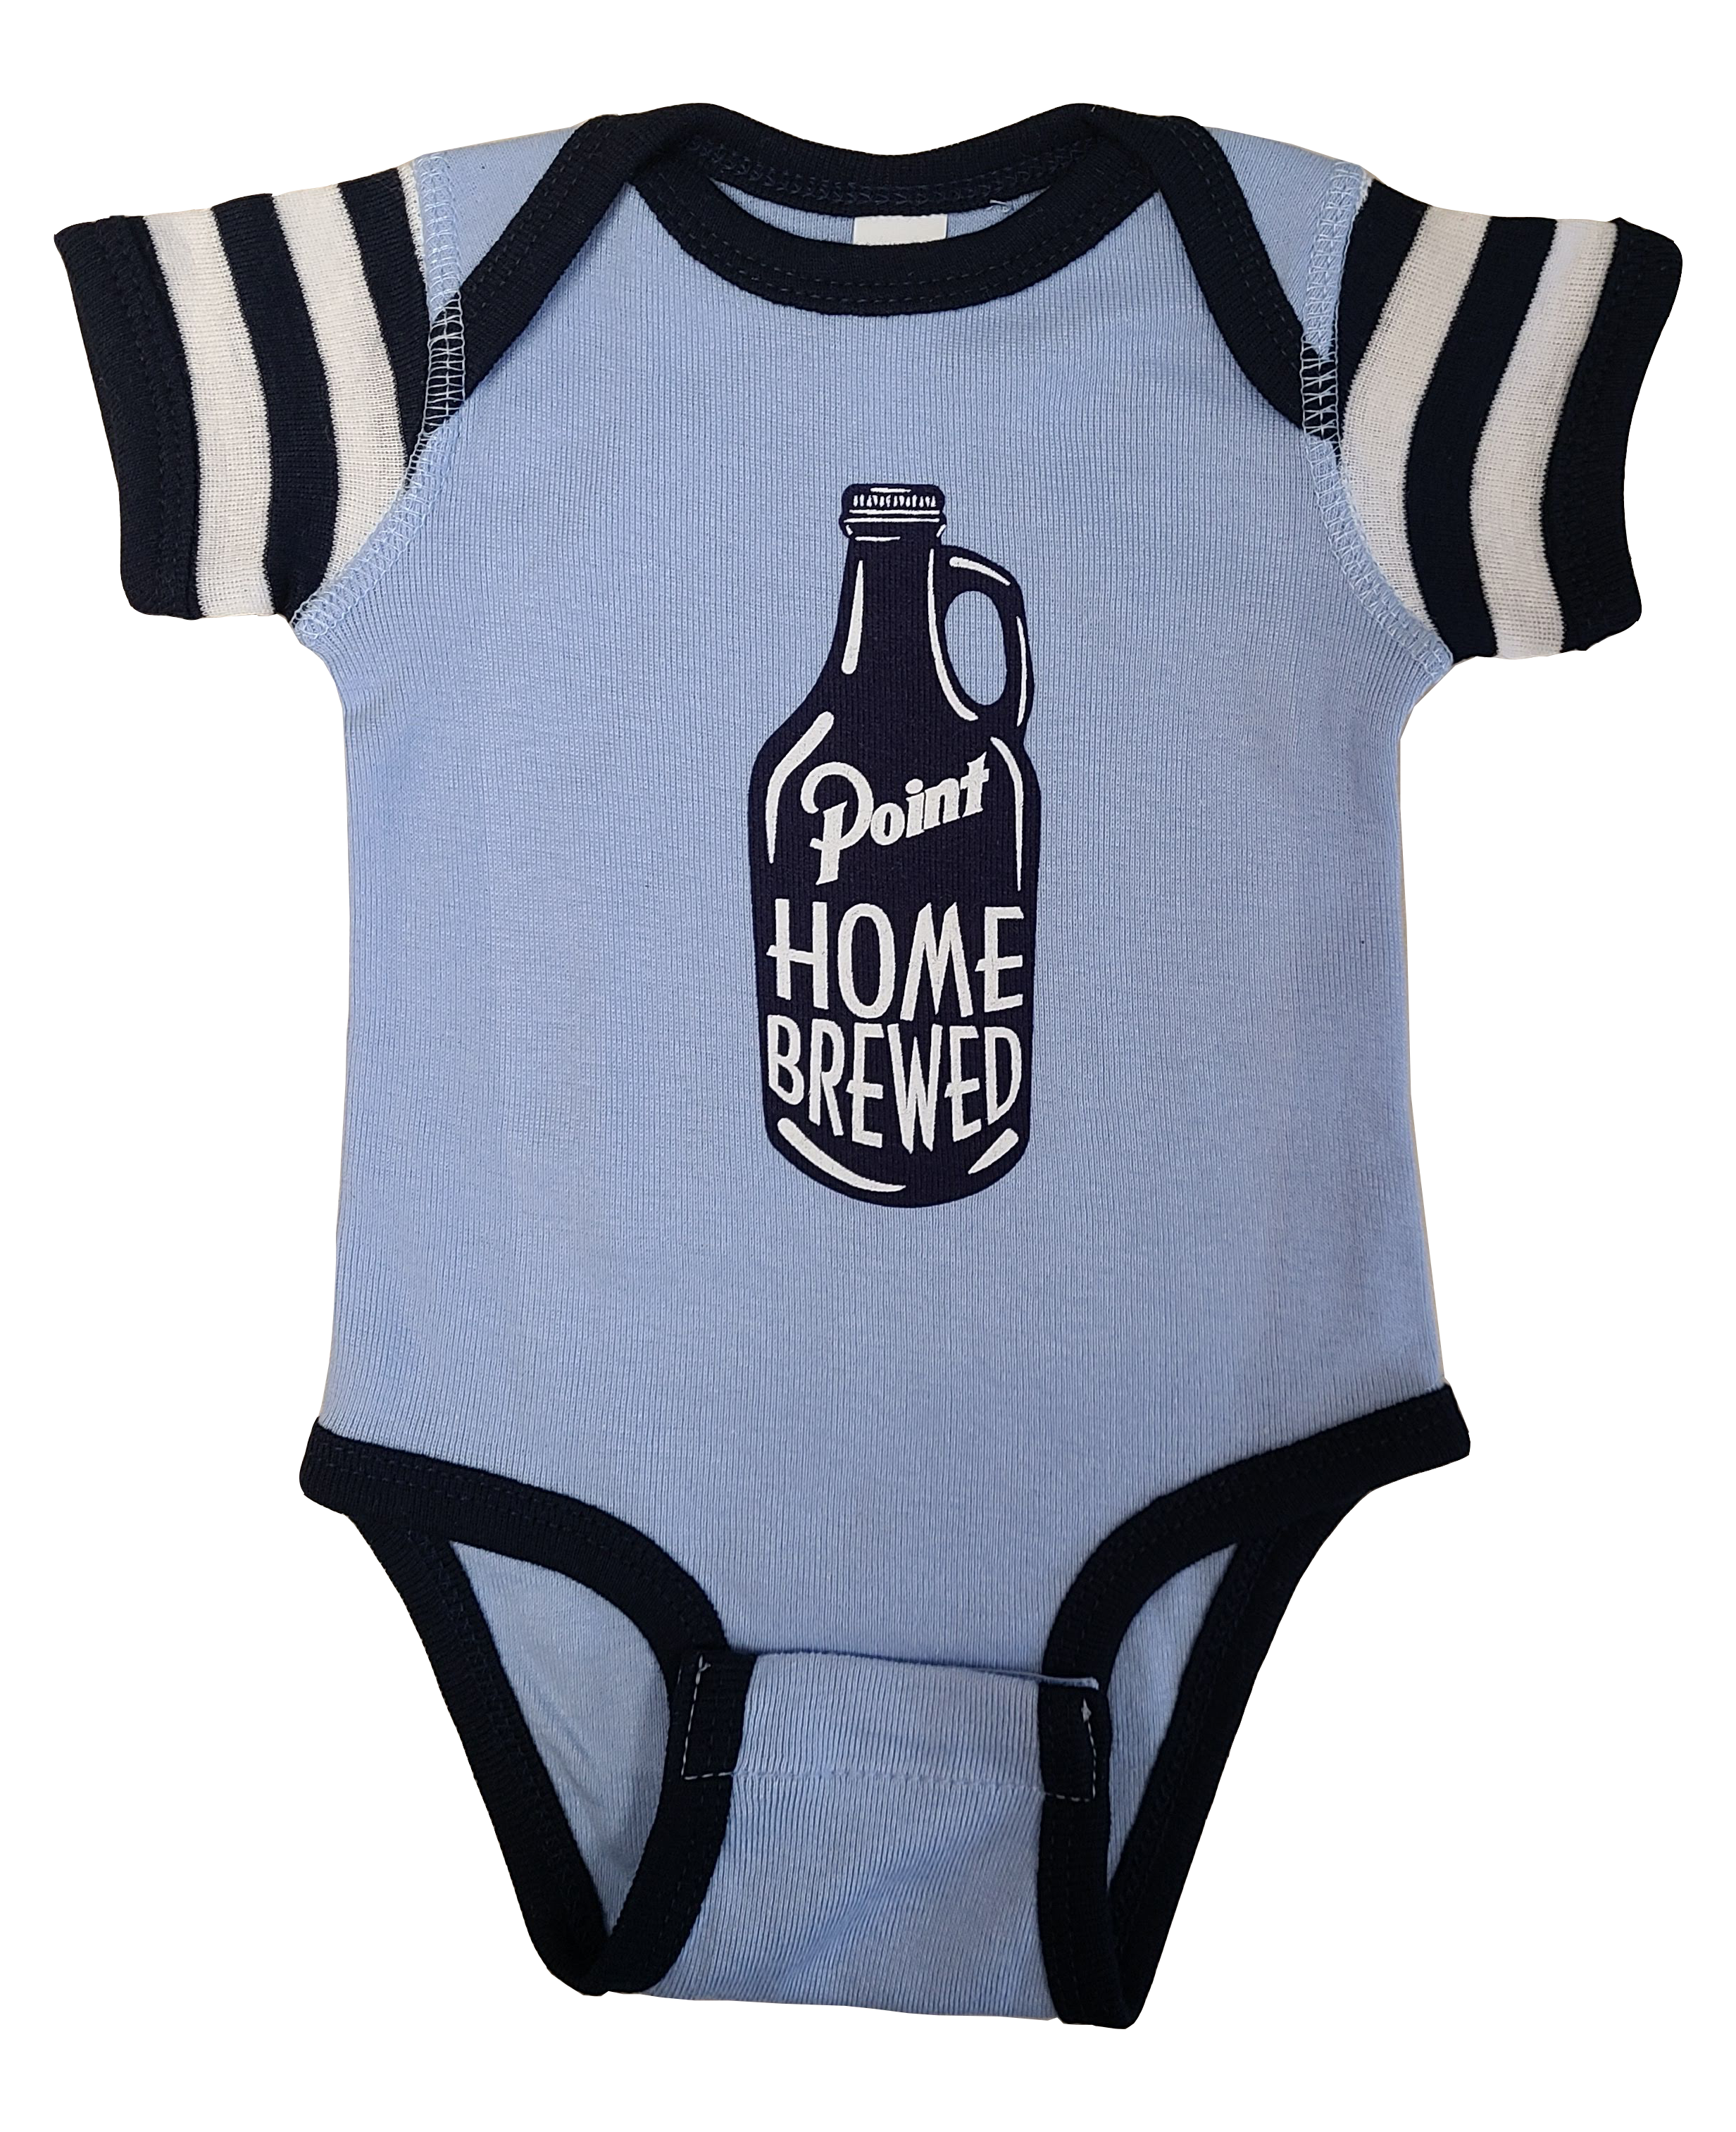 Home Brewed Baby Onesie Featured Product Image